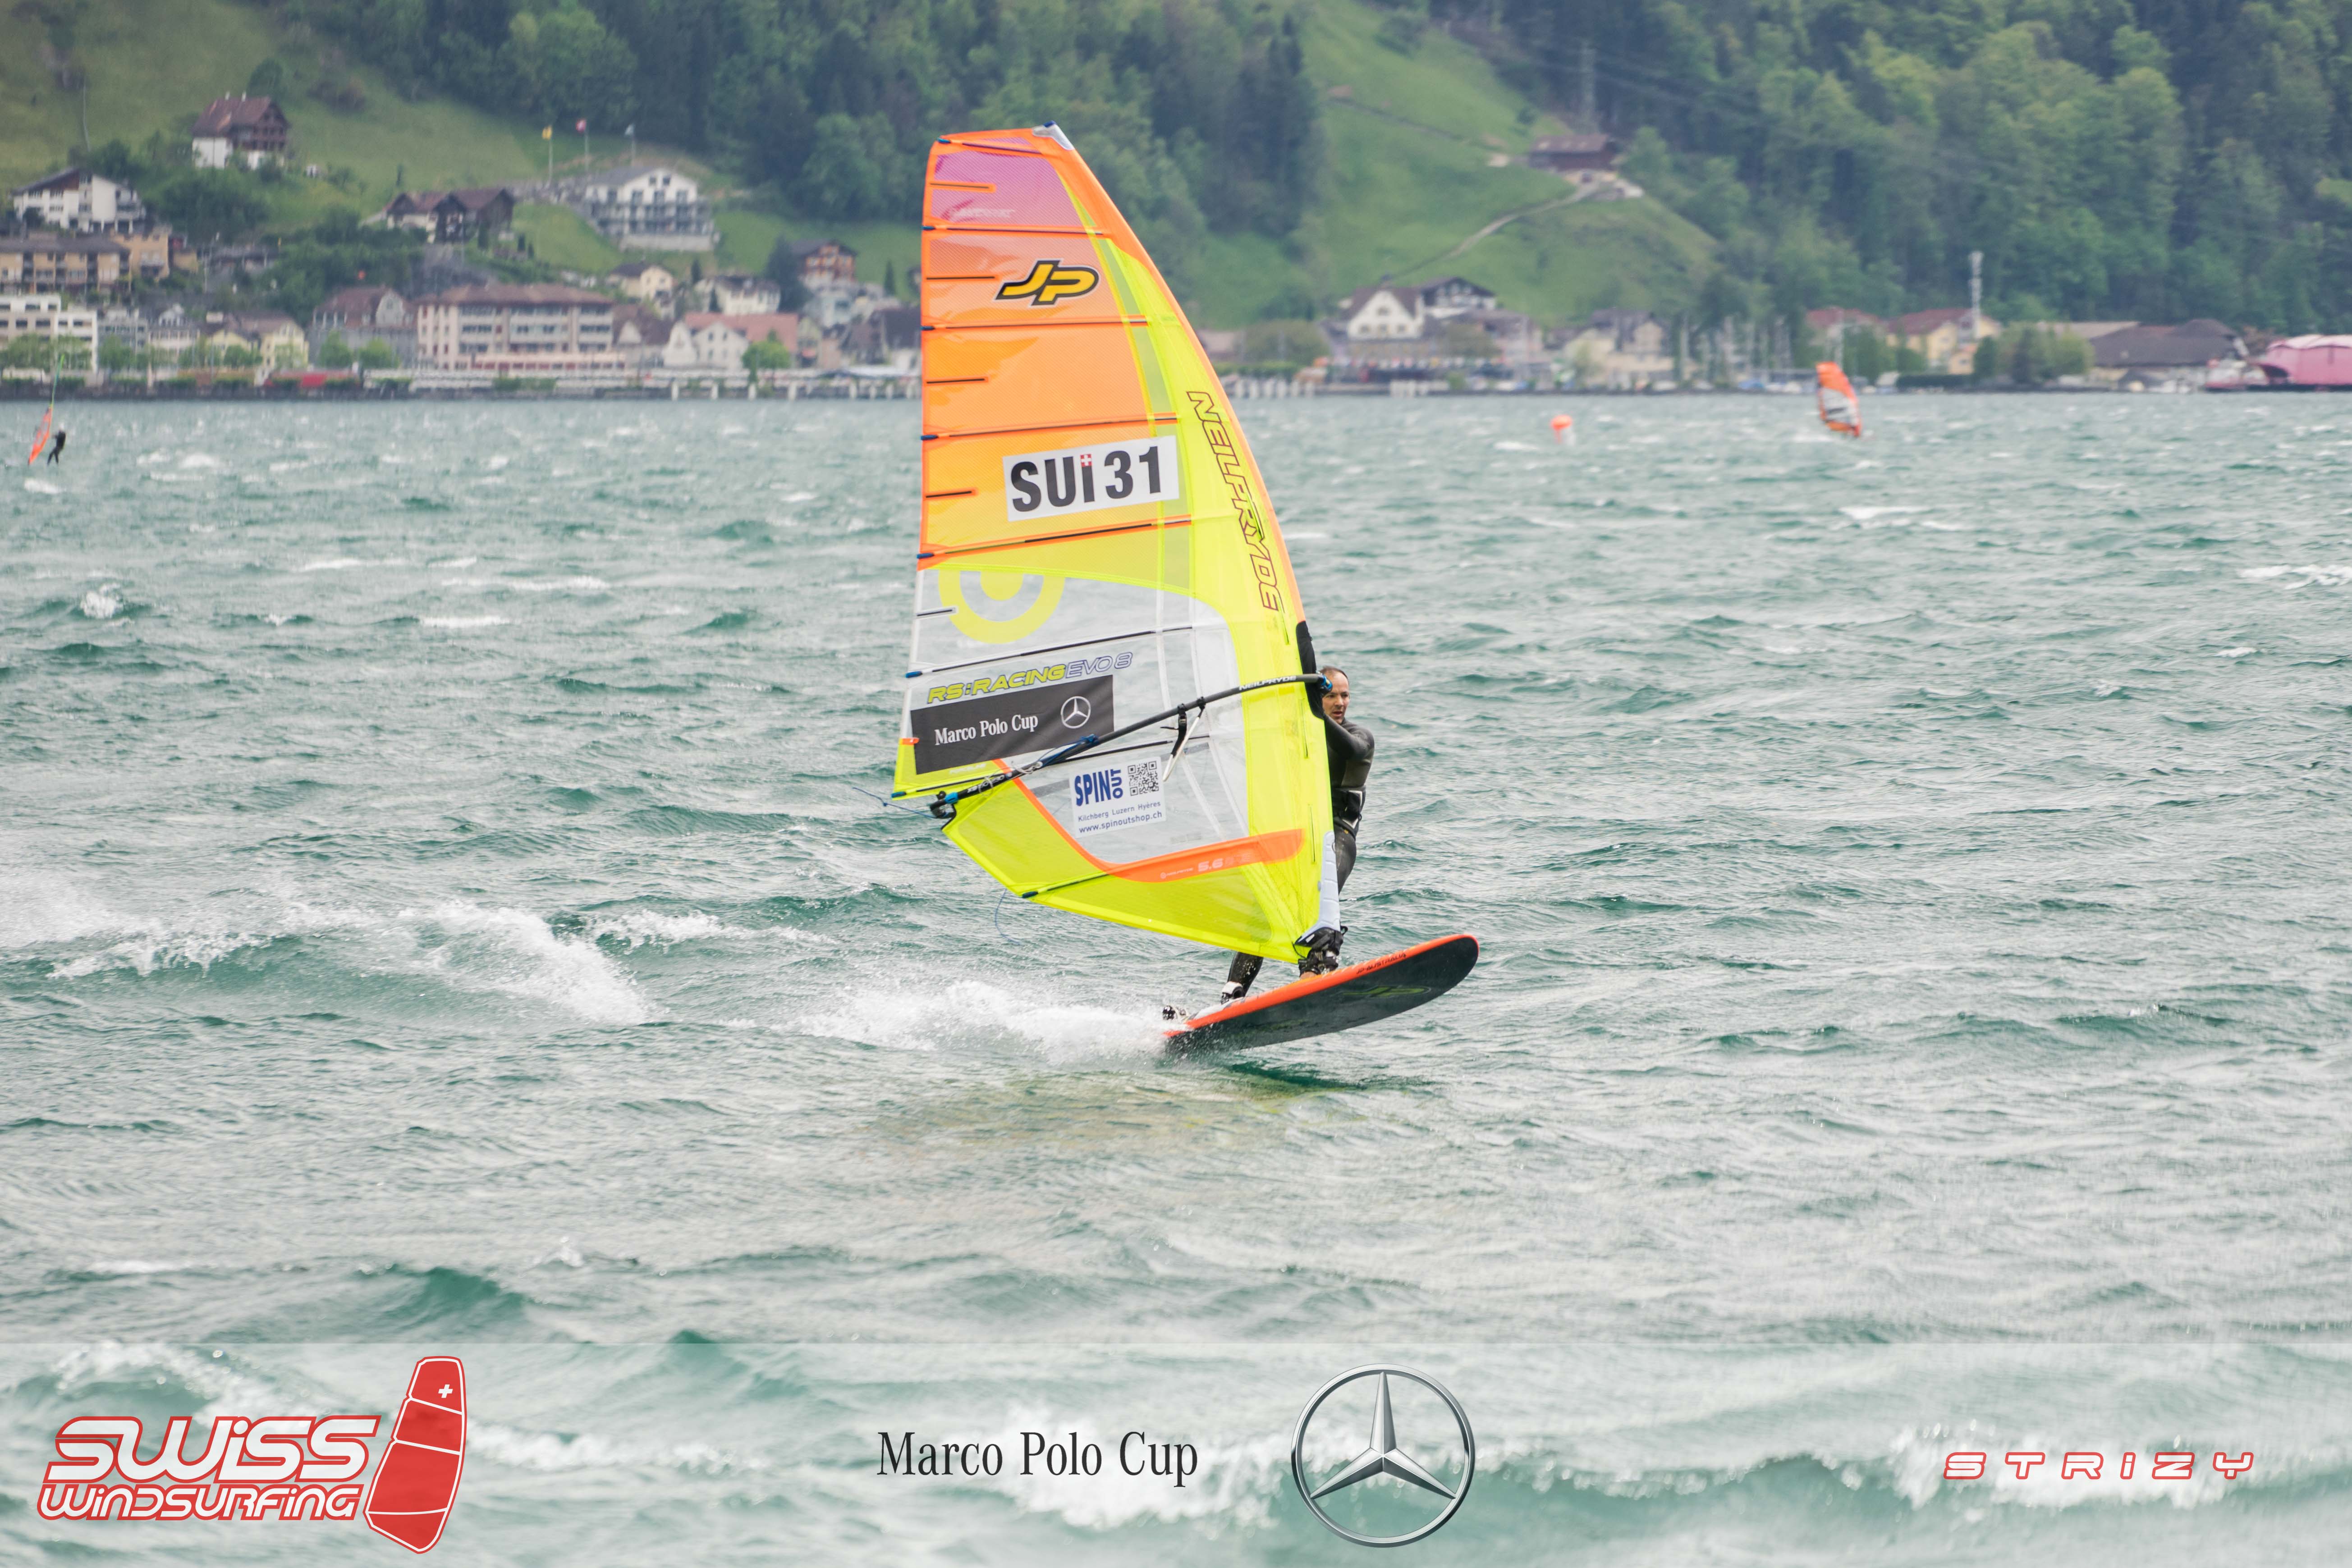  Windsurfing  MarcoPoloCup 2017  Urnersee  Final results